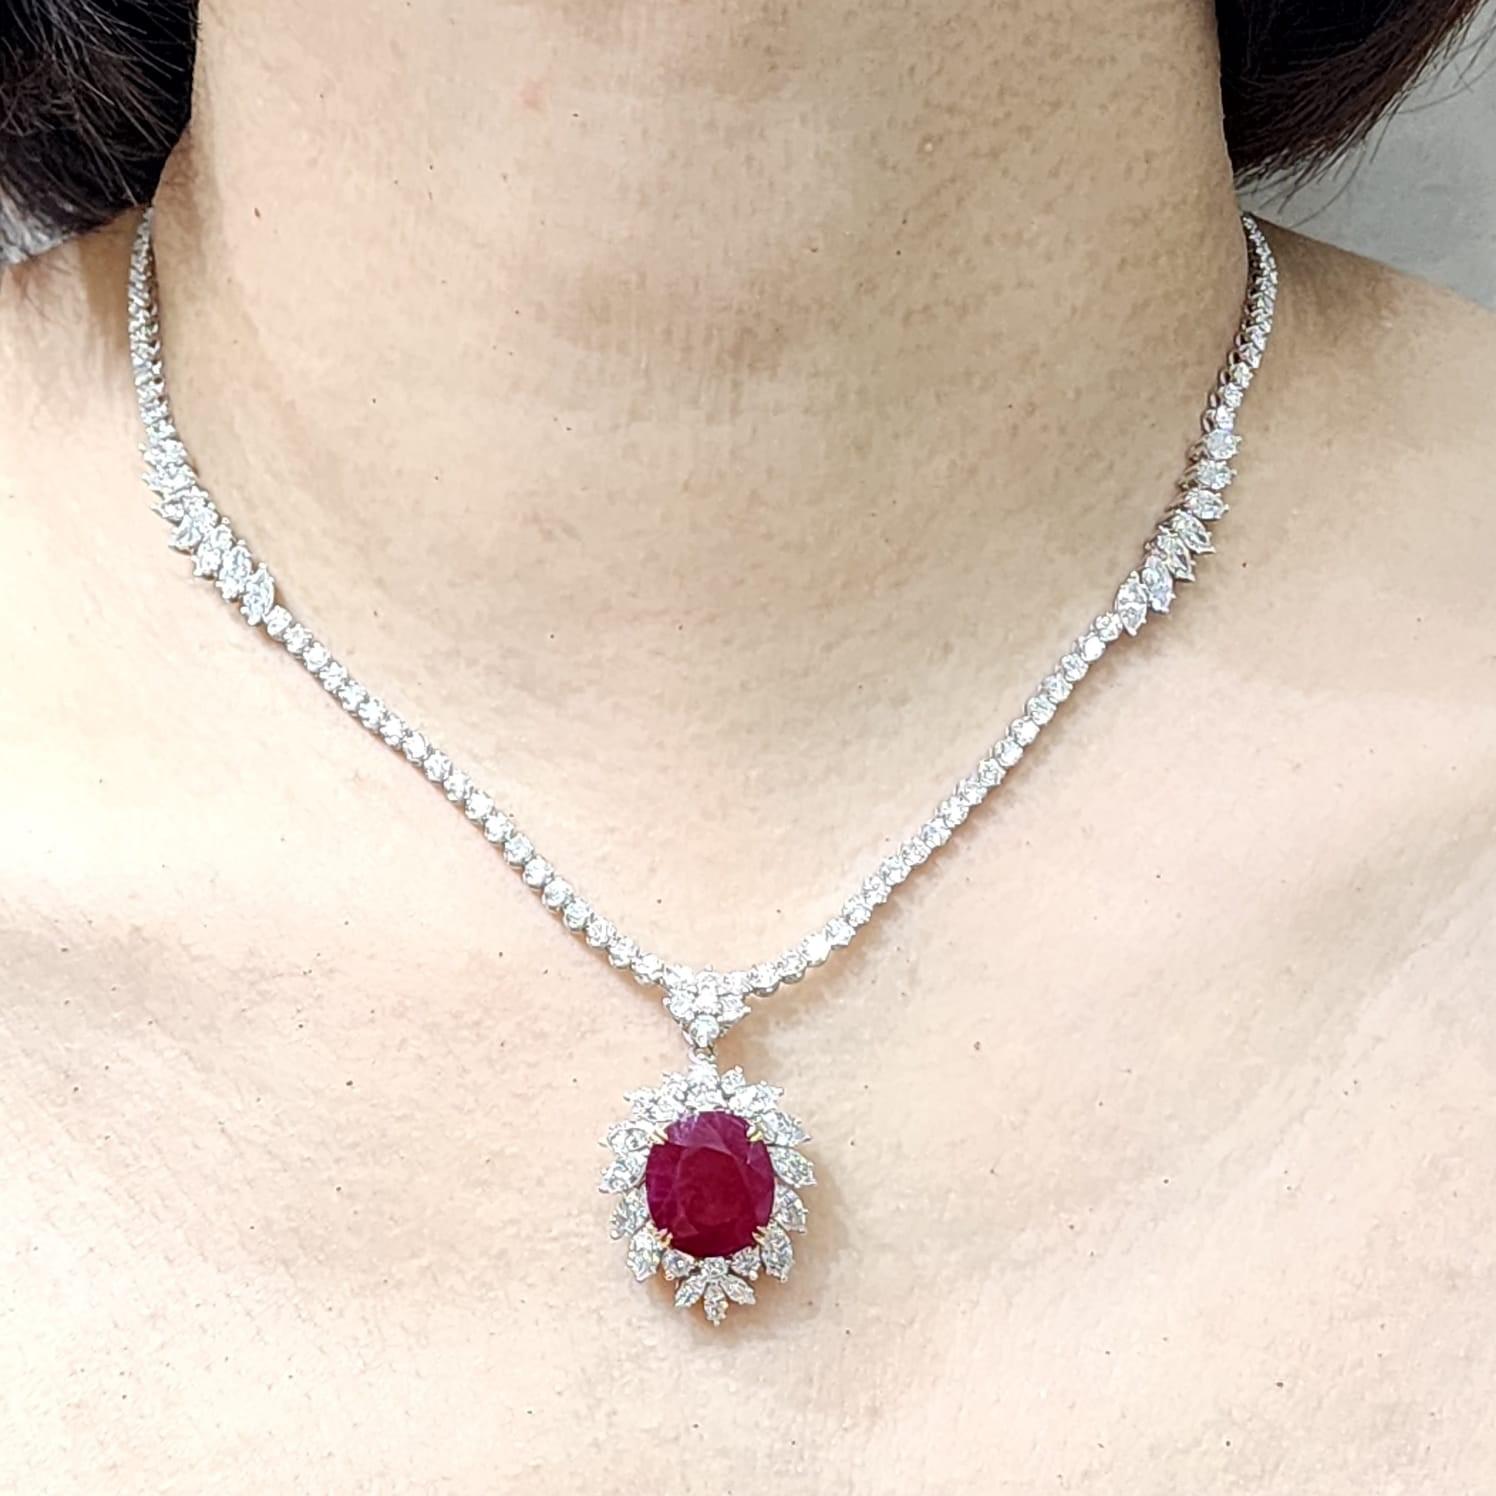 8.61 Carat Burma Ruby Diamond Necklace in 18 Karat White Gold In New Condition For Sale In Hong Kong, HK